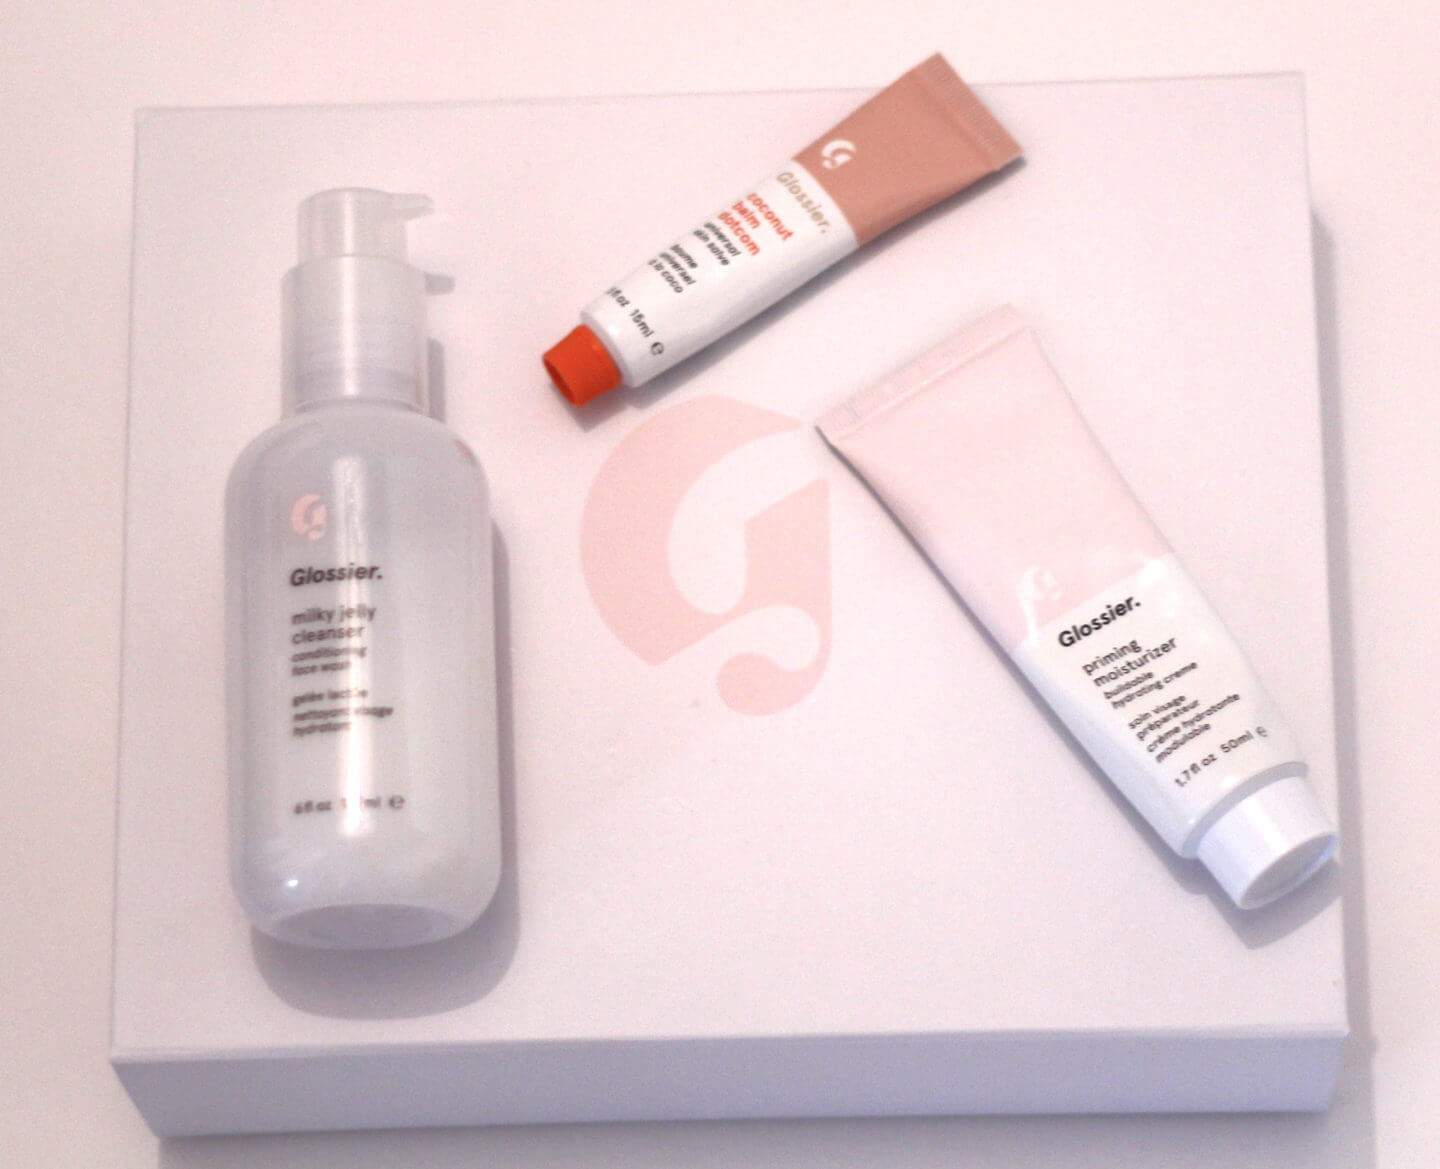 Glossier Phase 1 Set Review